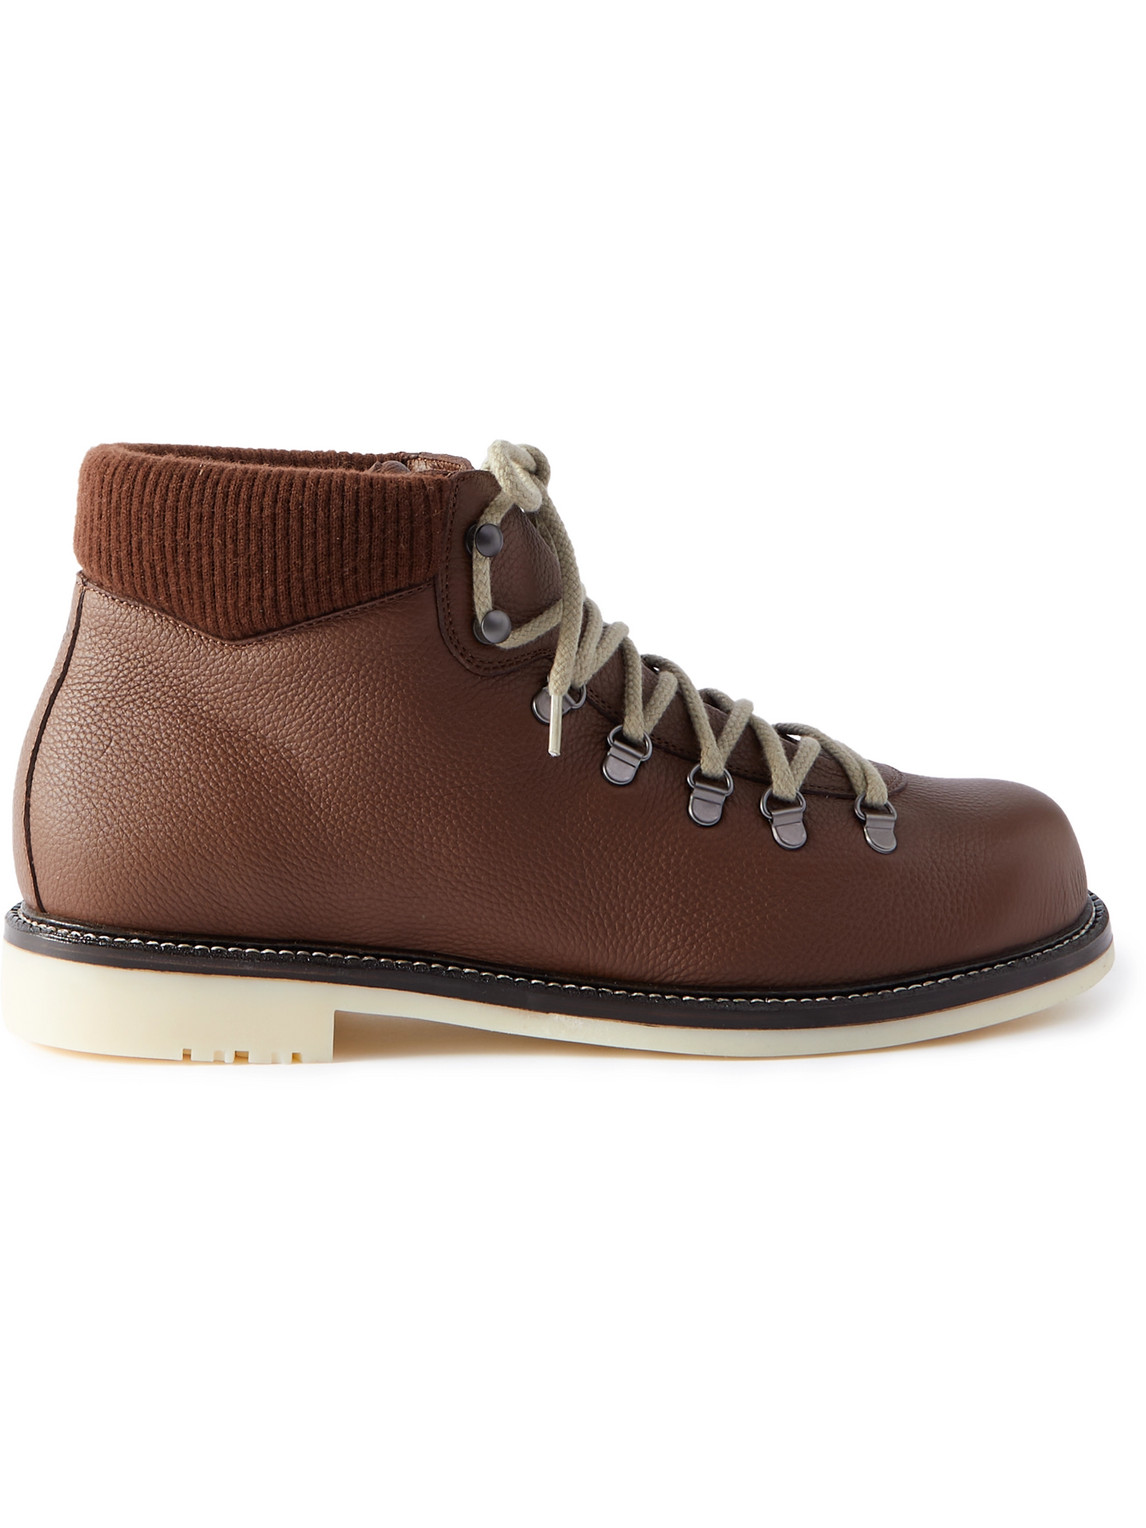 Laax Walk Baby Cashmere-Trimmed Textured-Leather Hiking Boots